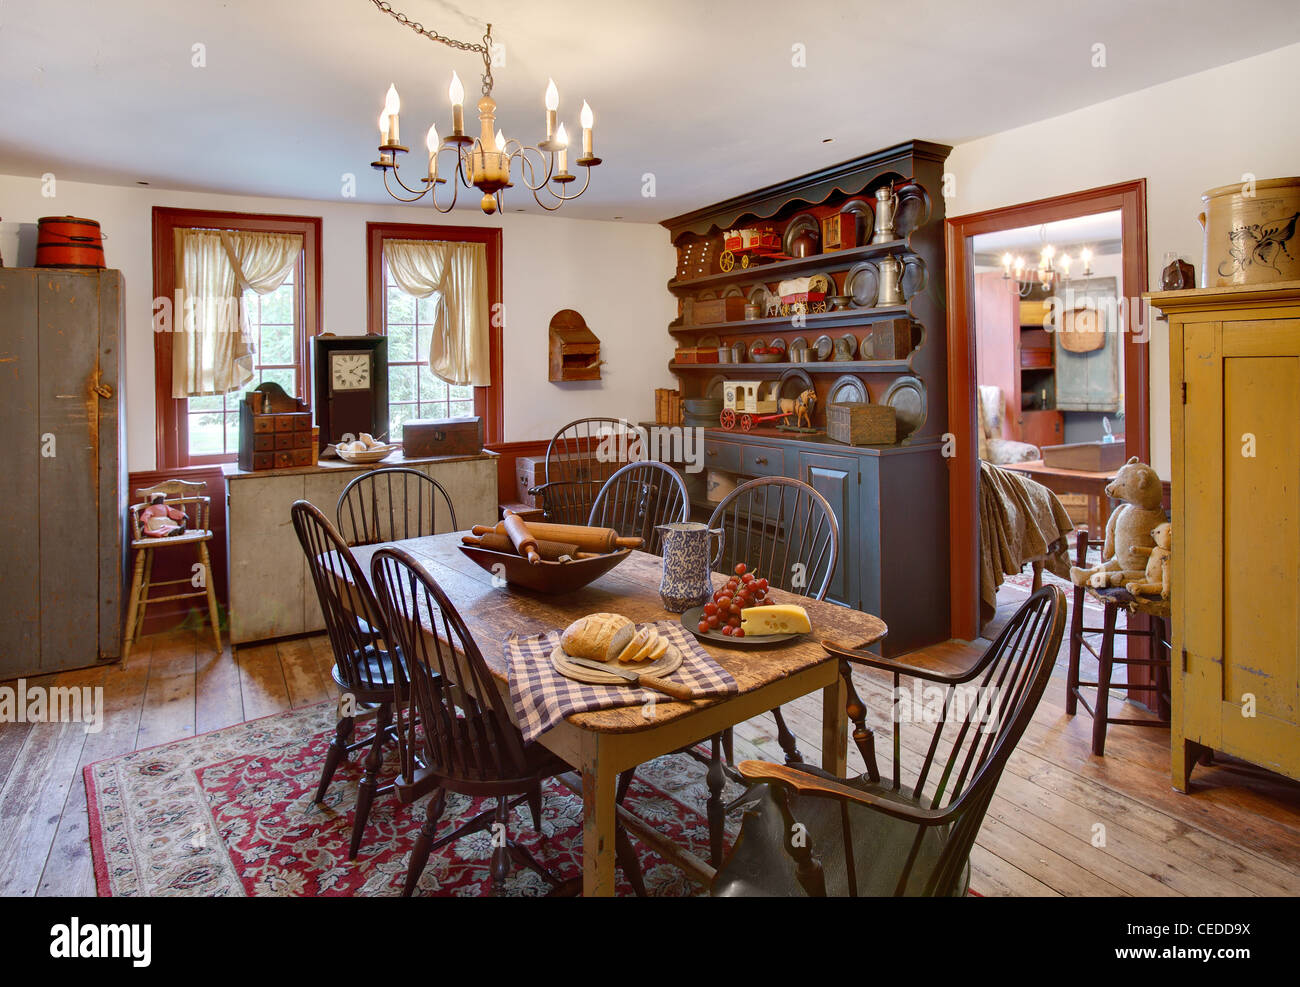 Primitive colonial dining room Stock Photo